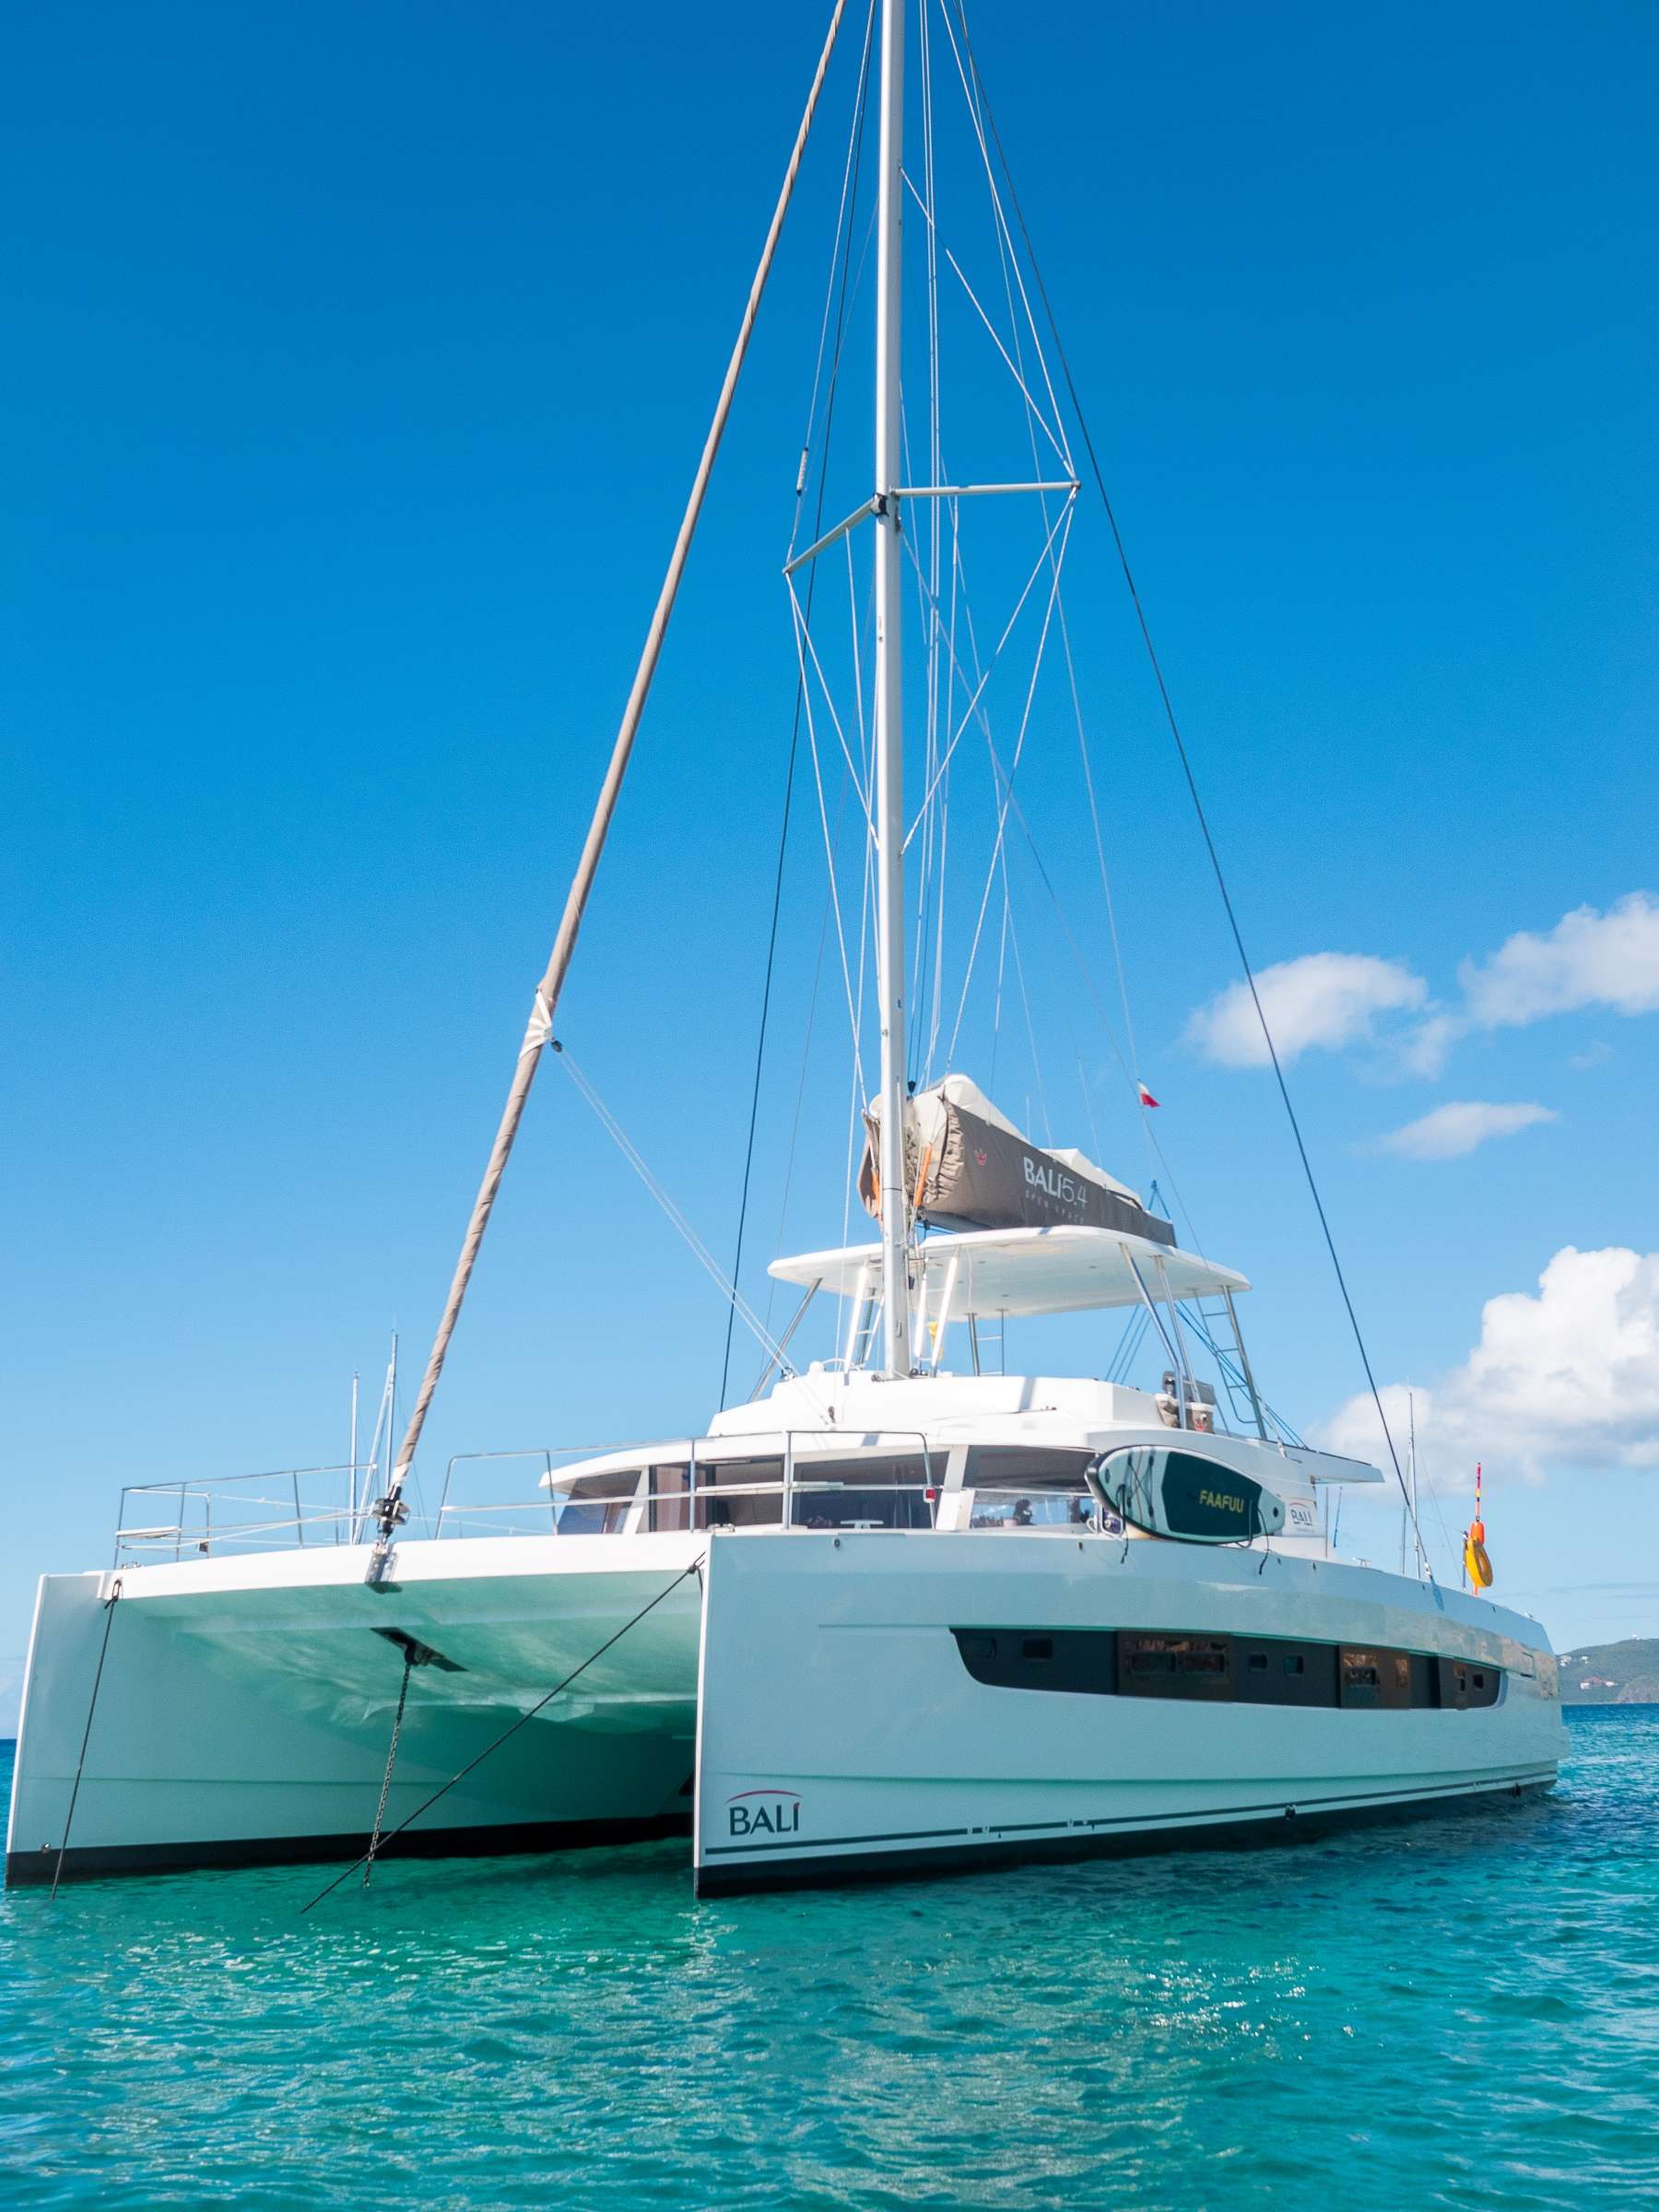 LEGASEA - Yacht Charter St Vincent & Boat hire in Caribbean 1